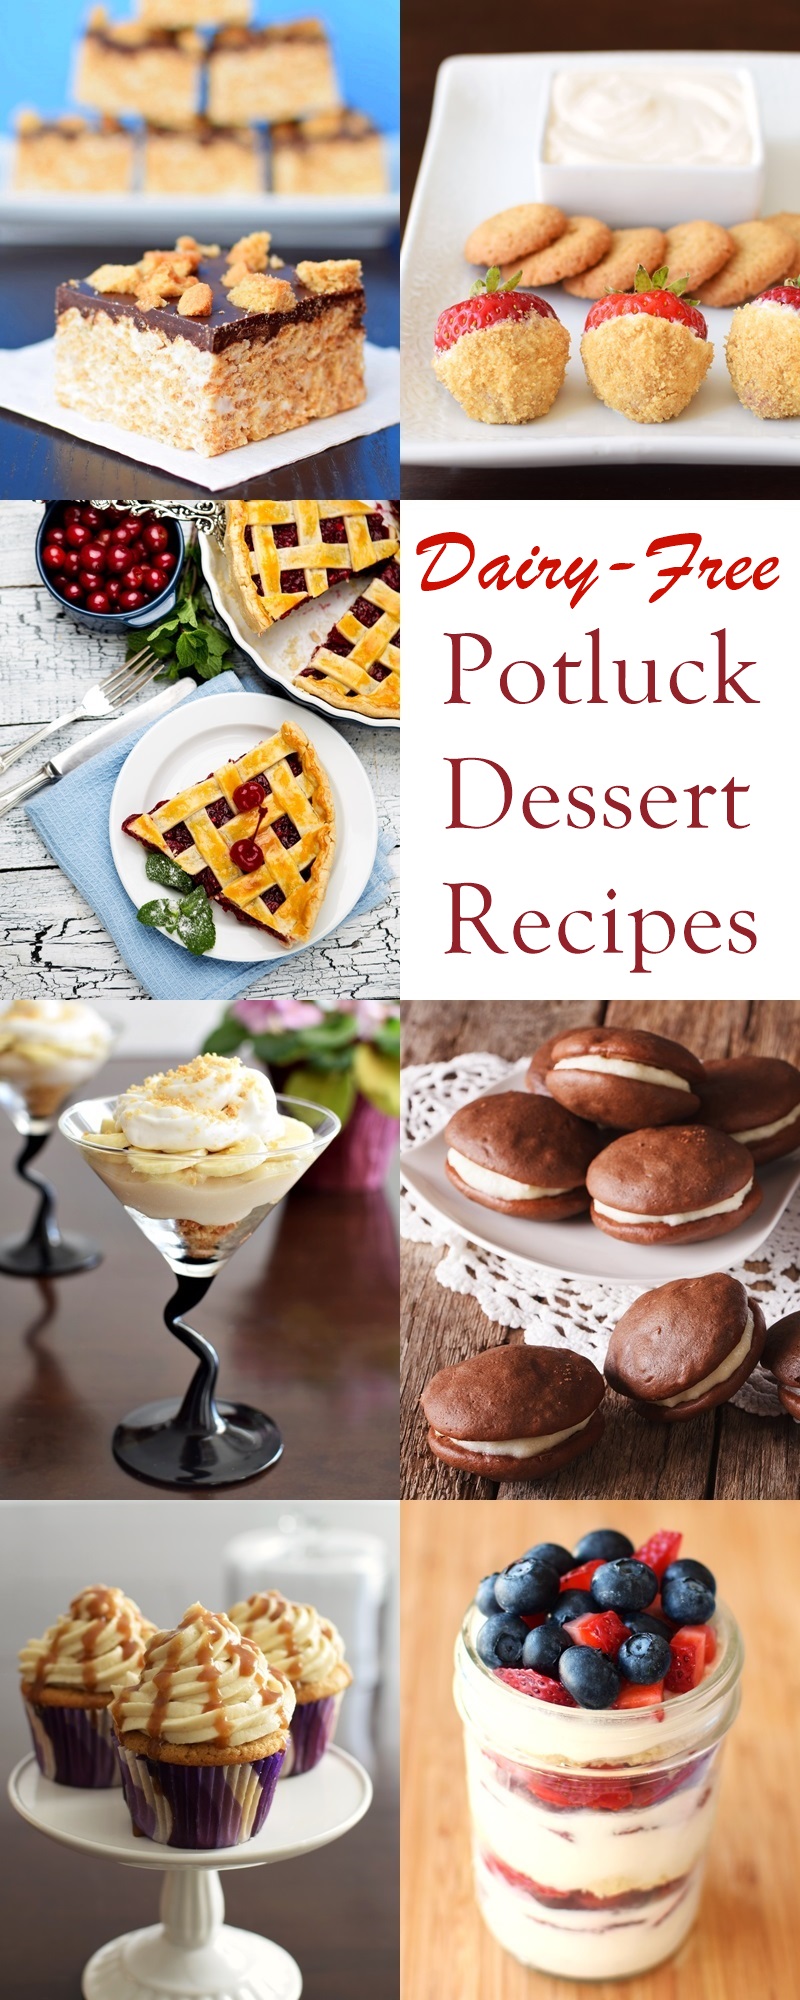 22 Dairy-Free Potluck Dessert Recipes that Everyone will Love! Vegan, gluten-free, nut-free and soy-free options